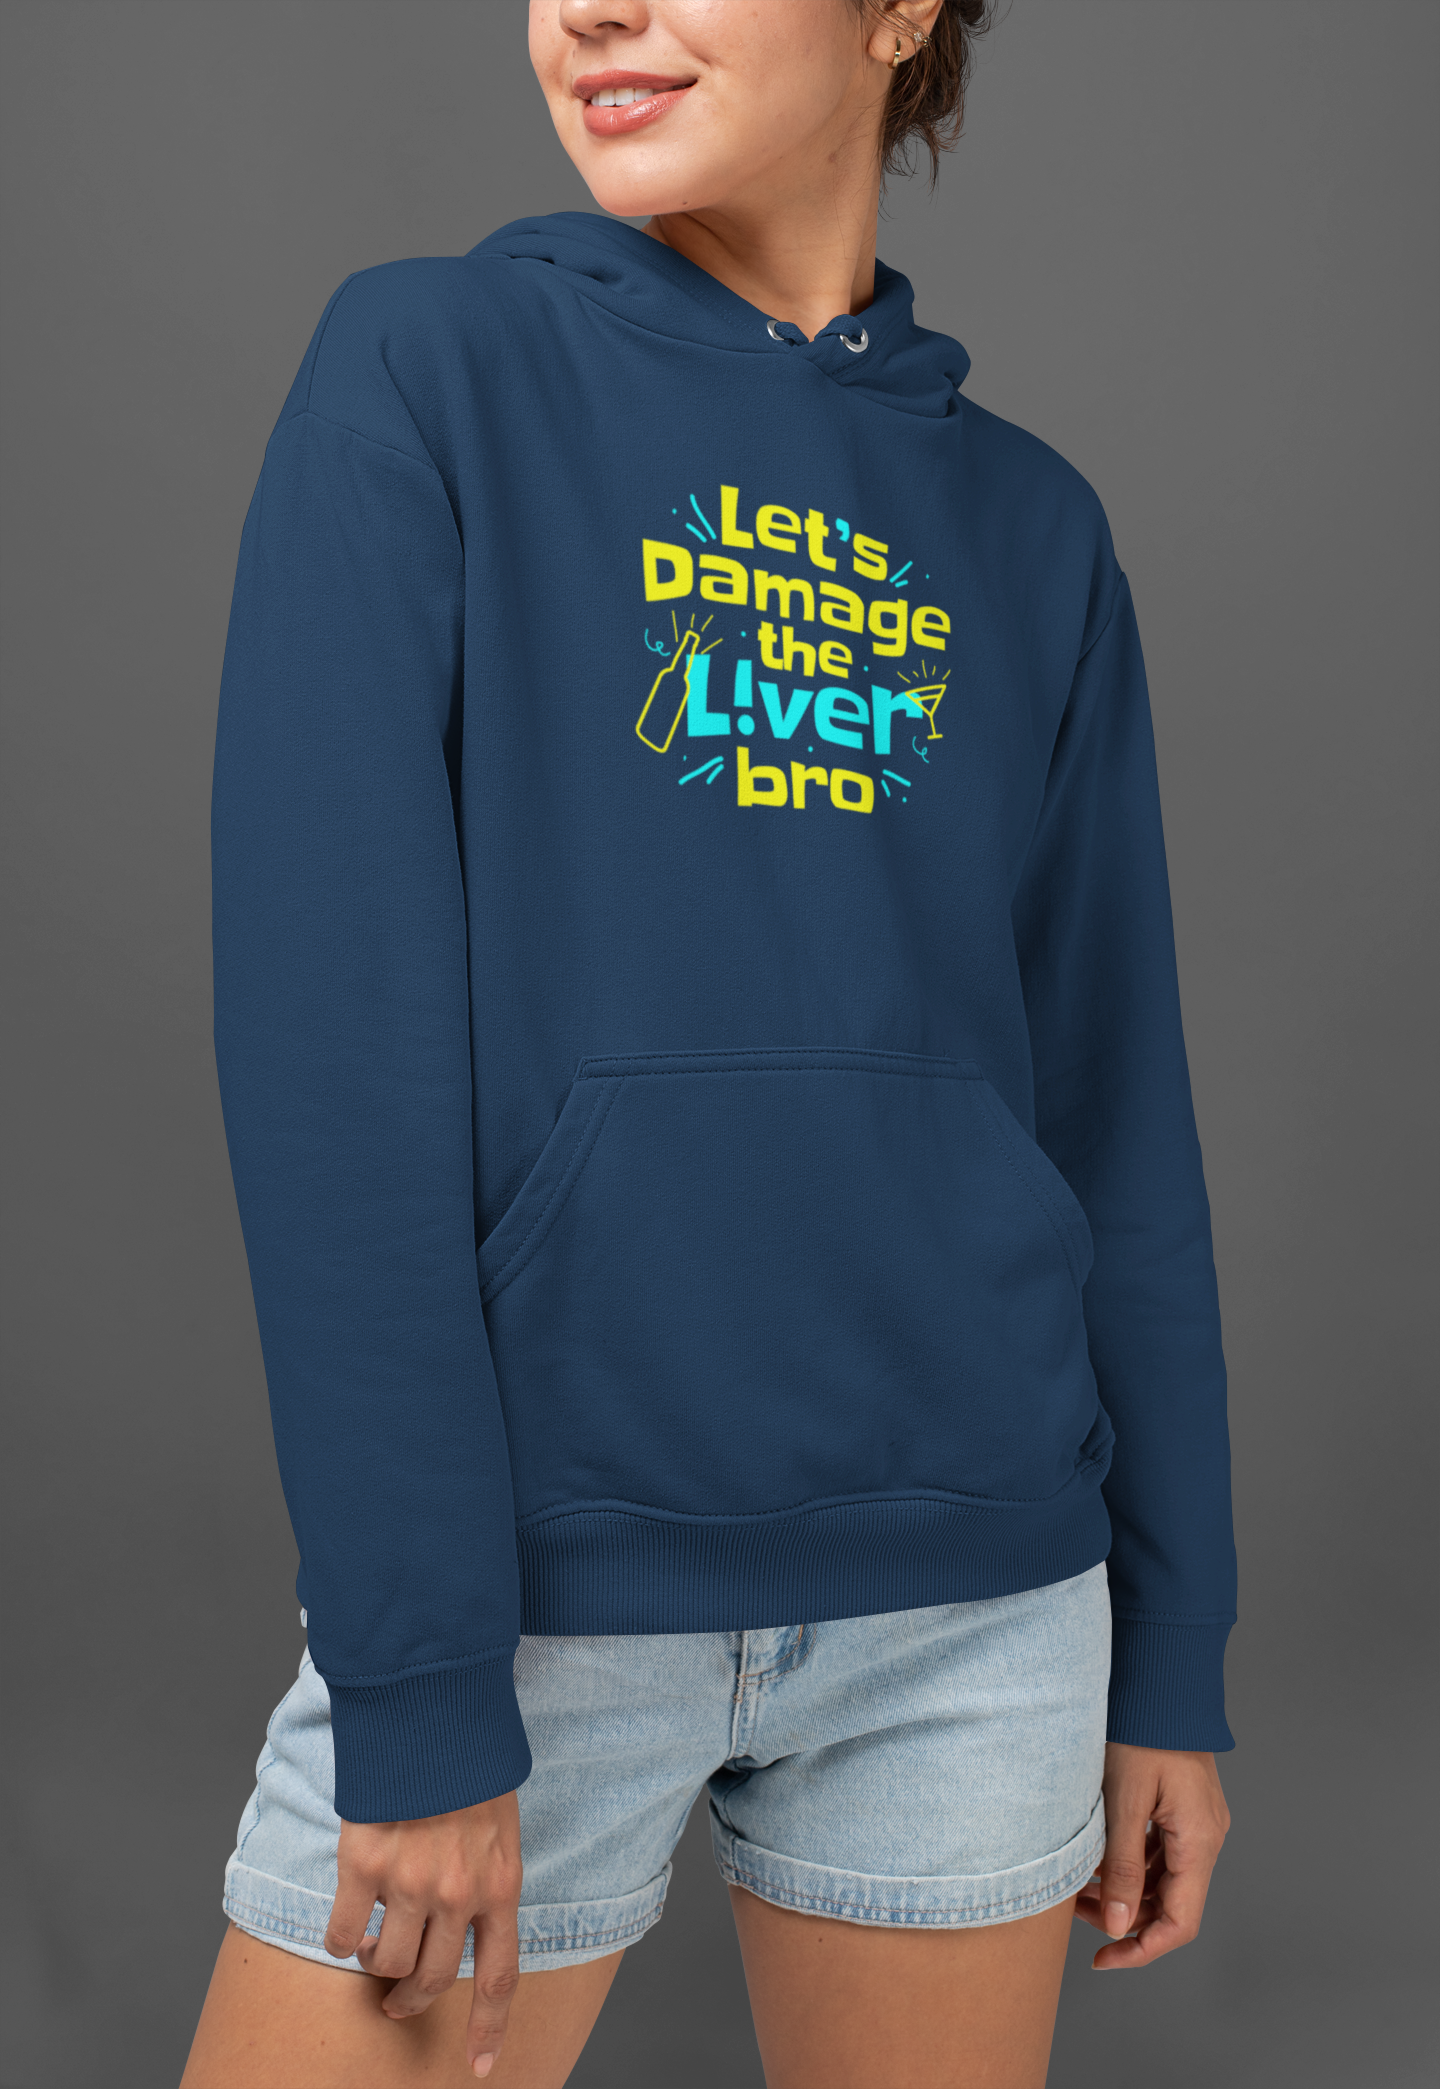 Let's damage the liver bro Unisex Hoodie - Mad Monkey